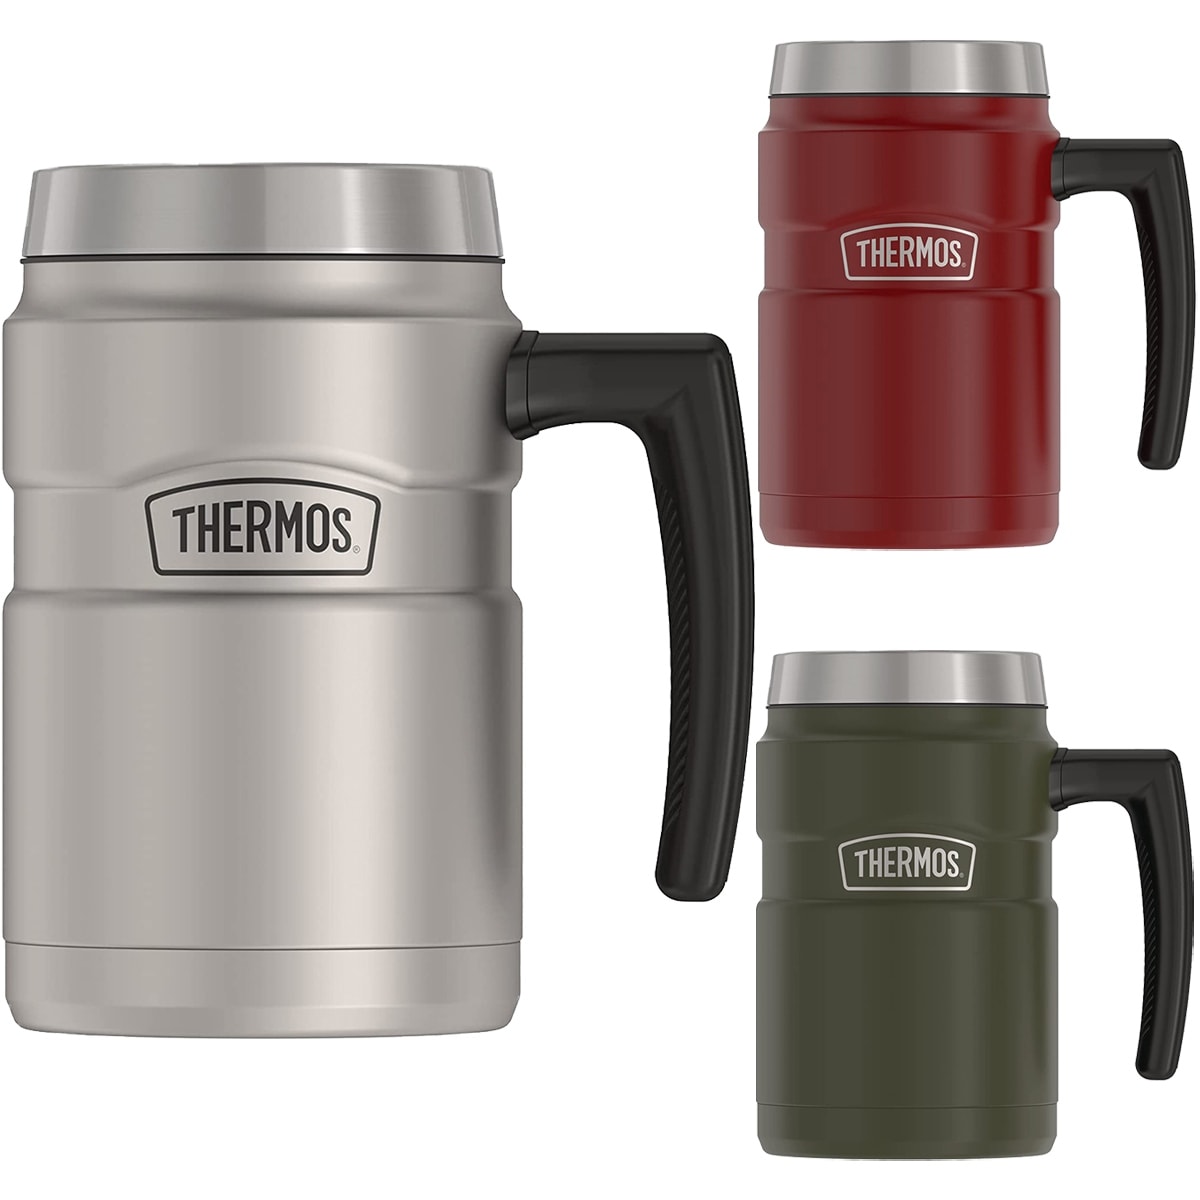 Thermos 16 oz. Stainless King Insulated Stainless Steel Coffee Mug